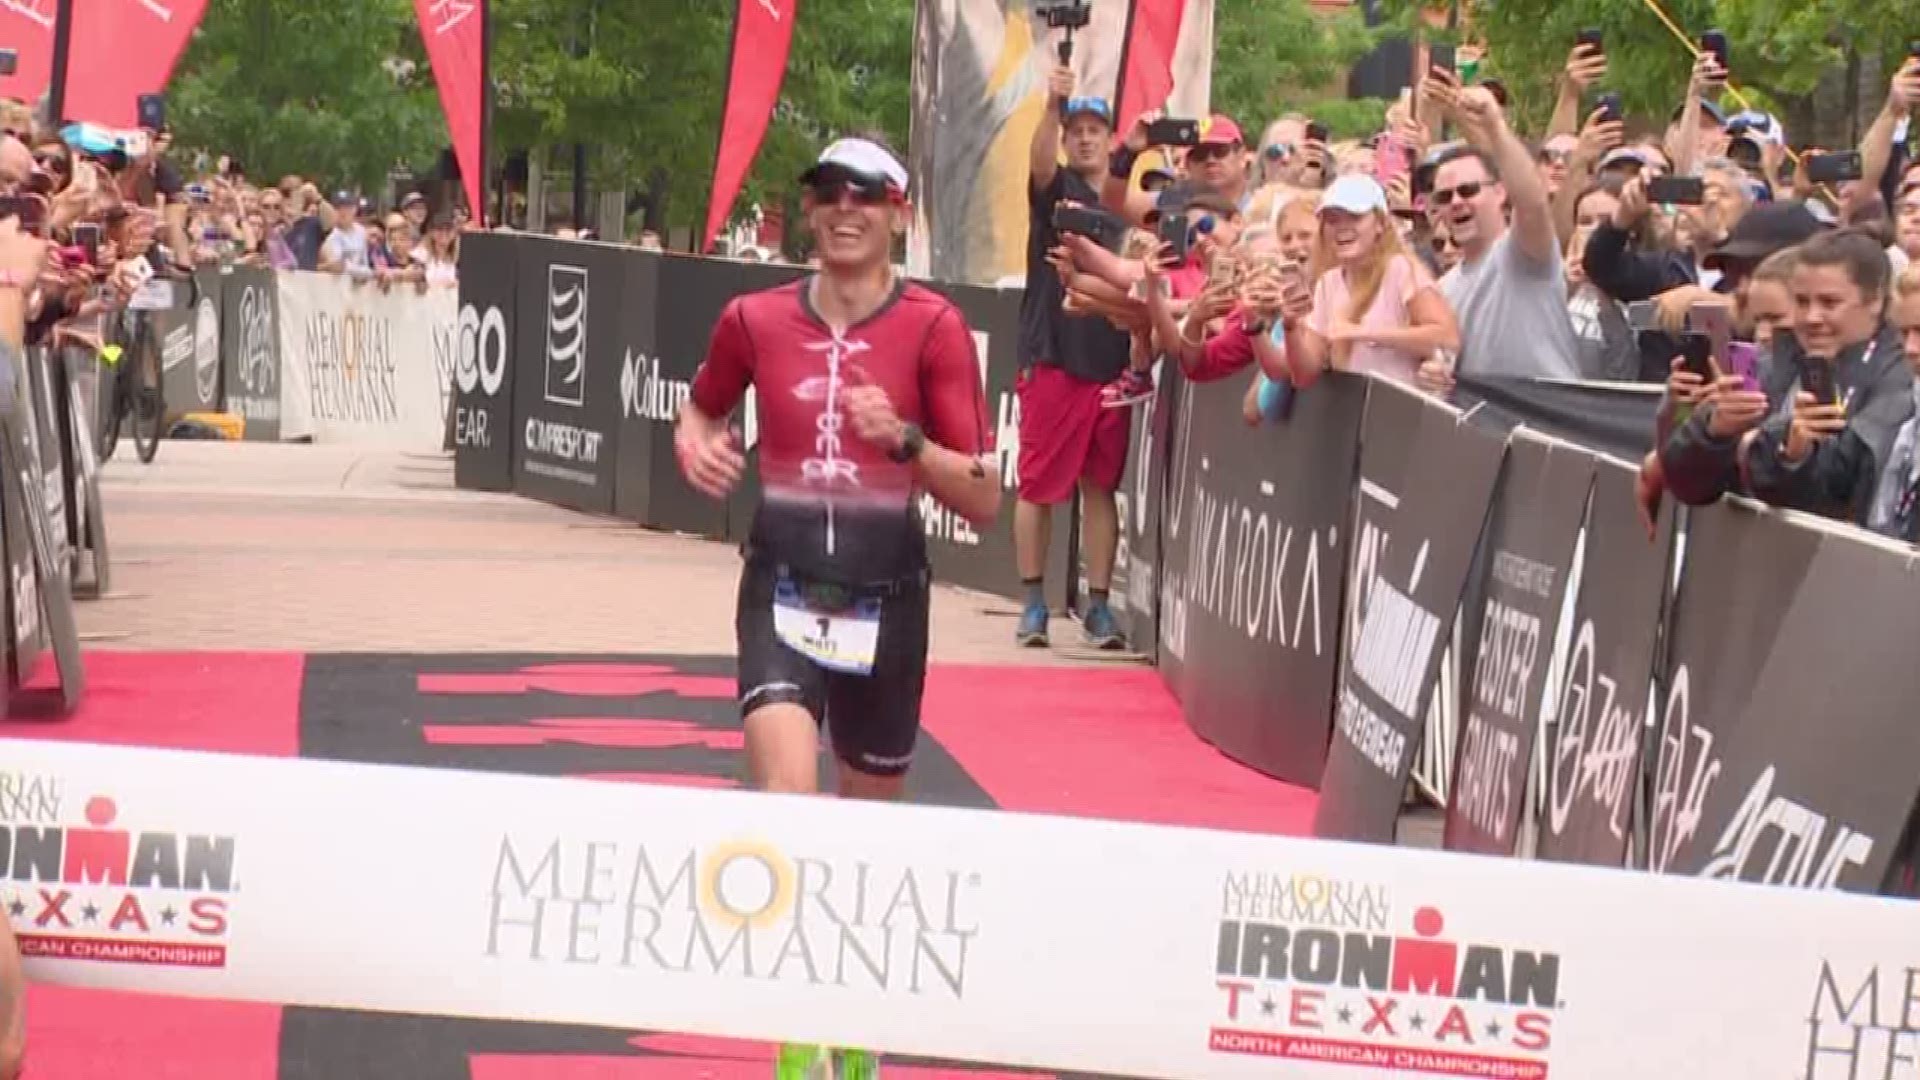 Athlete dies during IRONMAN competition in The Woodlands